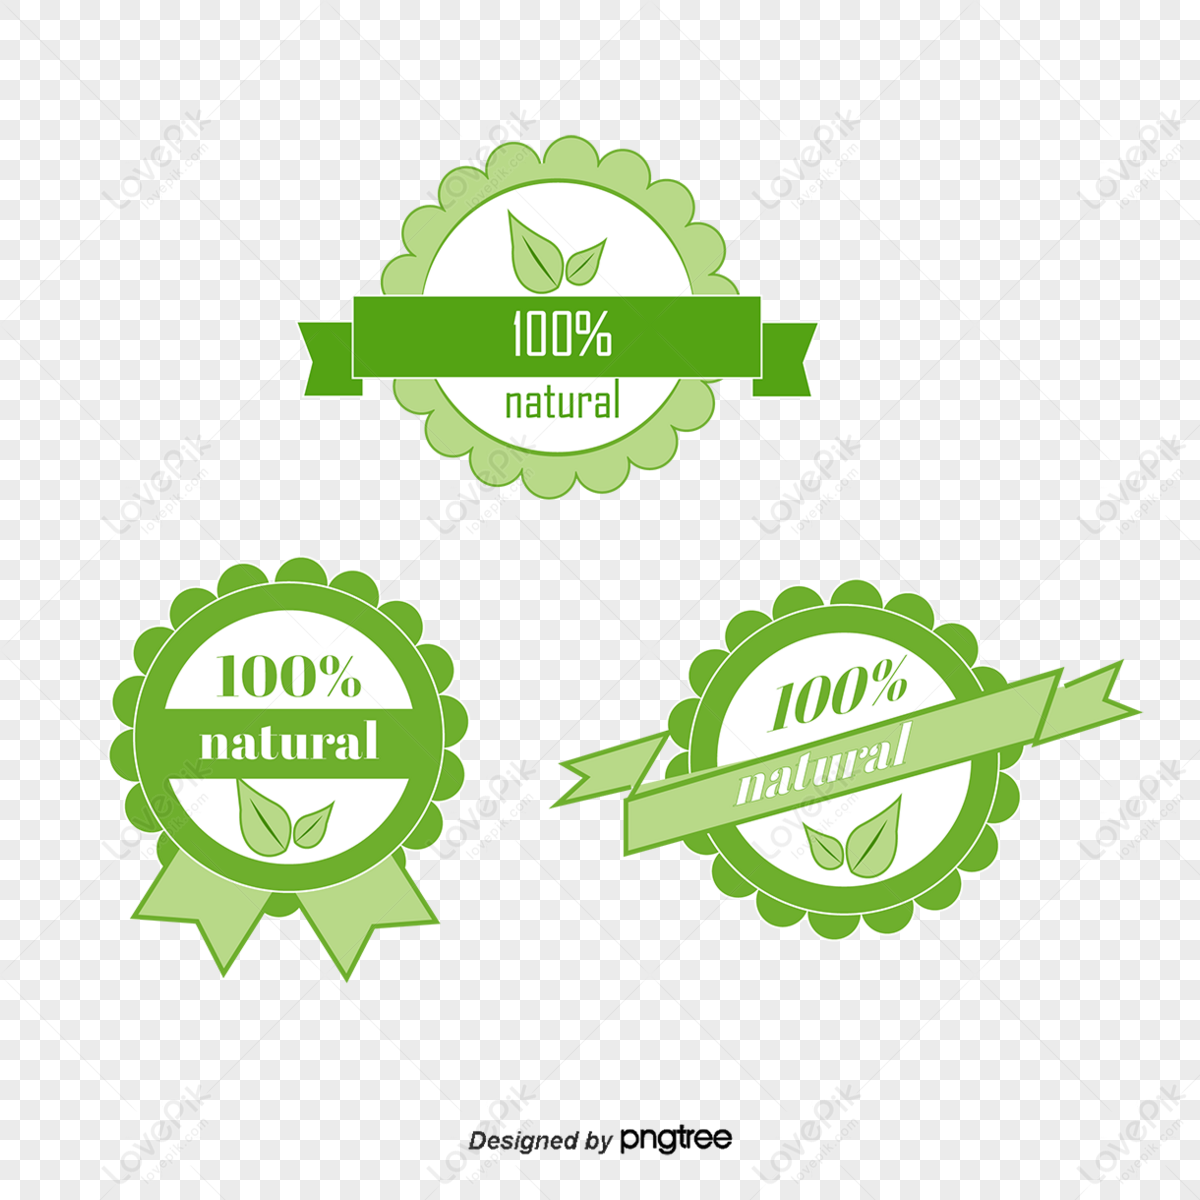 Nature 100 Images, HD Pictures For Free Vectors Download - Lovepik.com